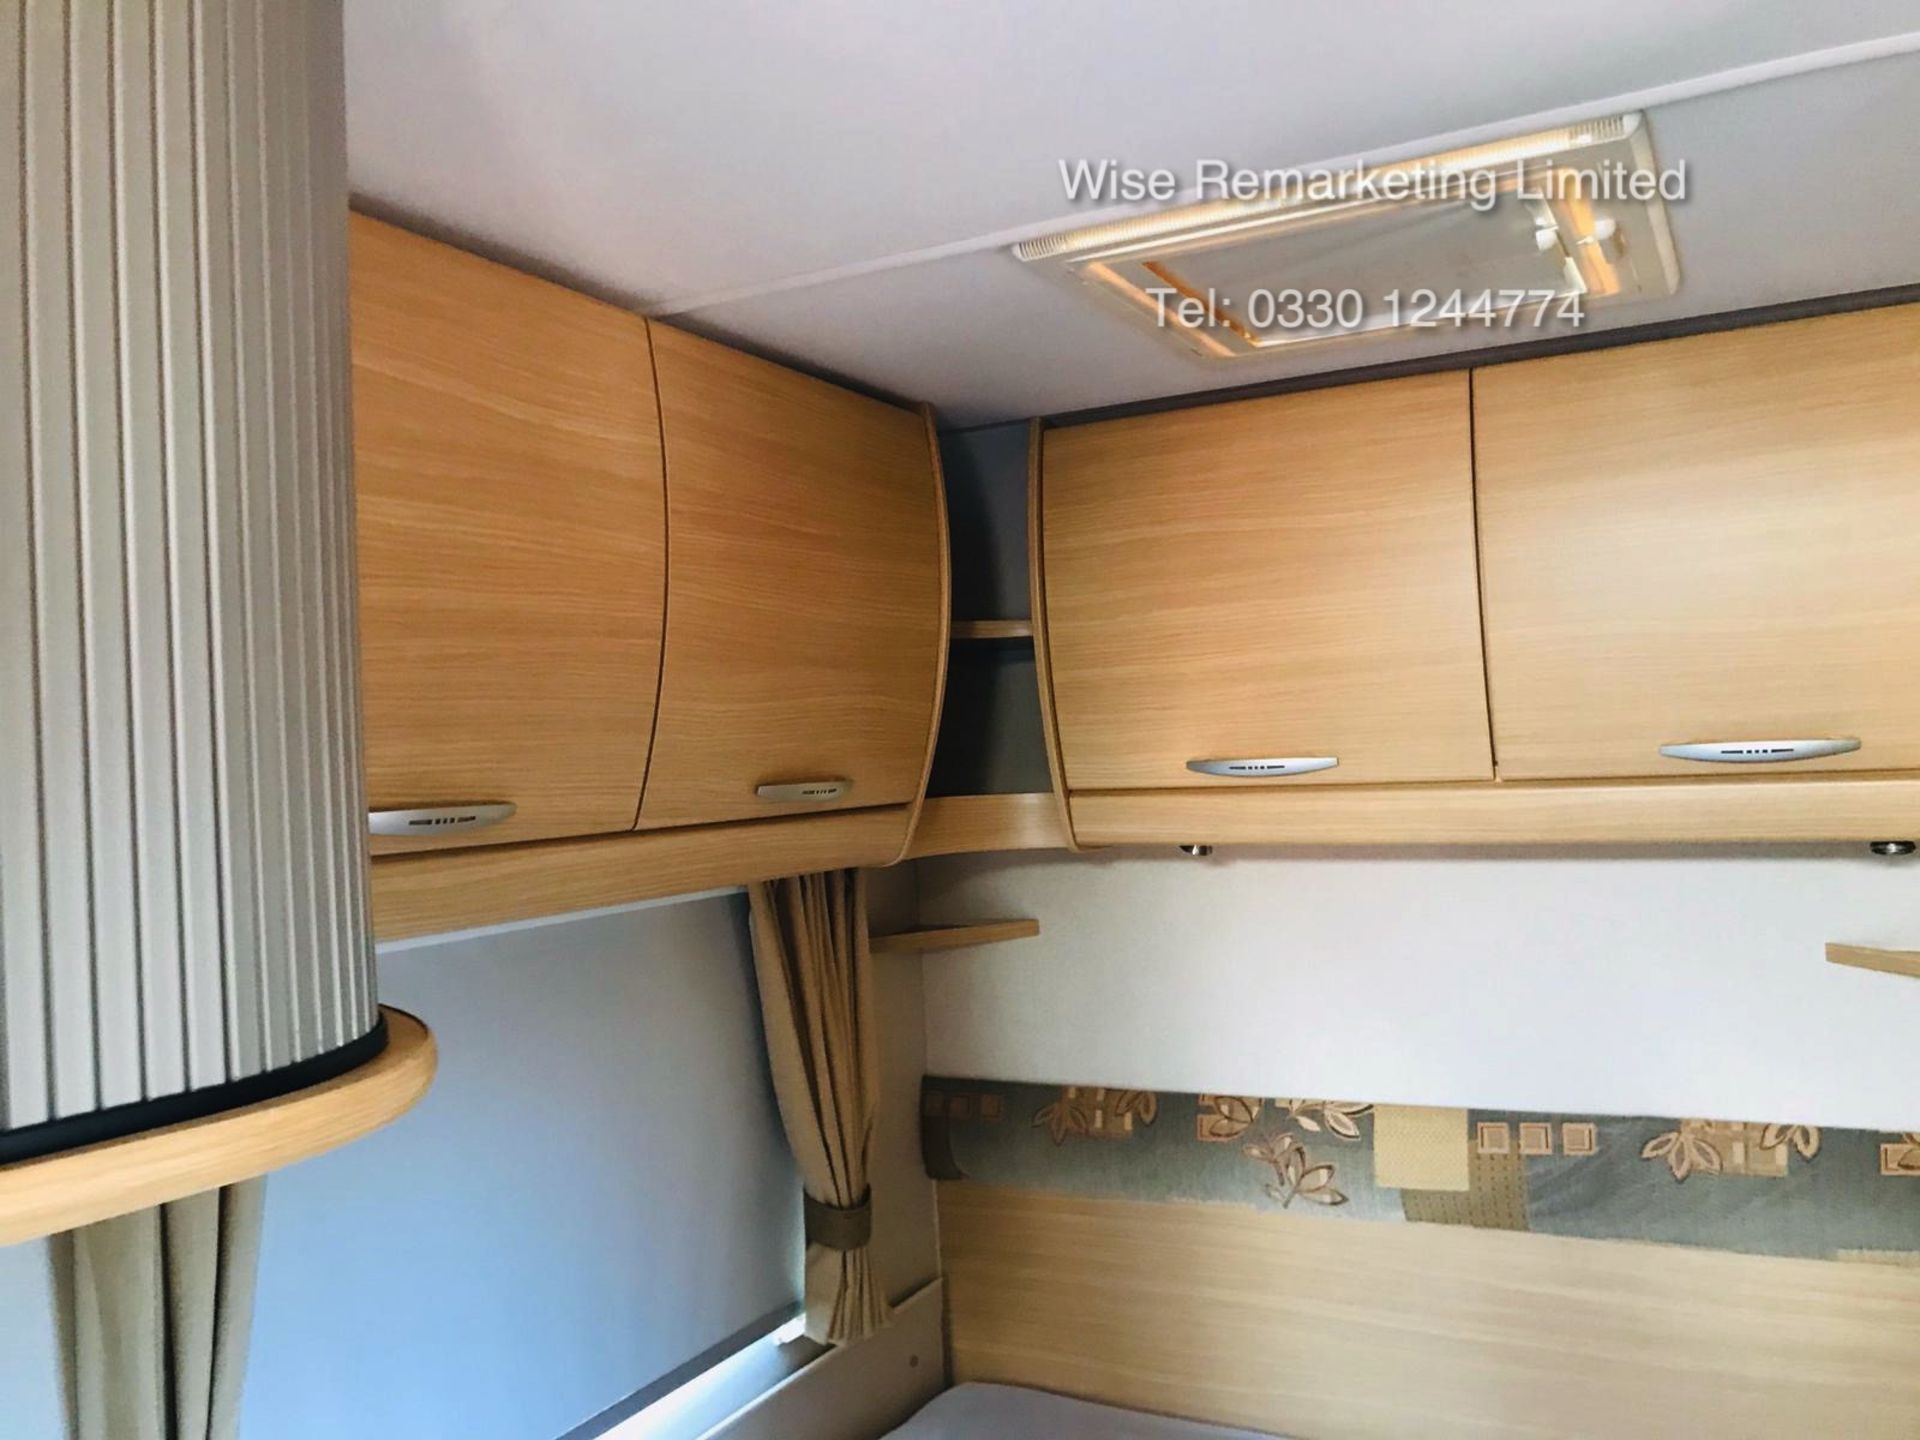 (RESERVE MET) Swift Abbey Freestyle 480 (4 Berth) Caravan - 2008 Model - 1 Former Keeper From New - Image 19 of 32